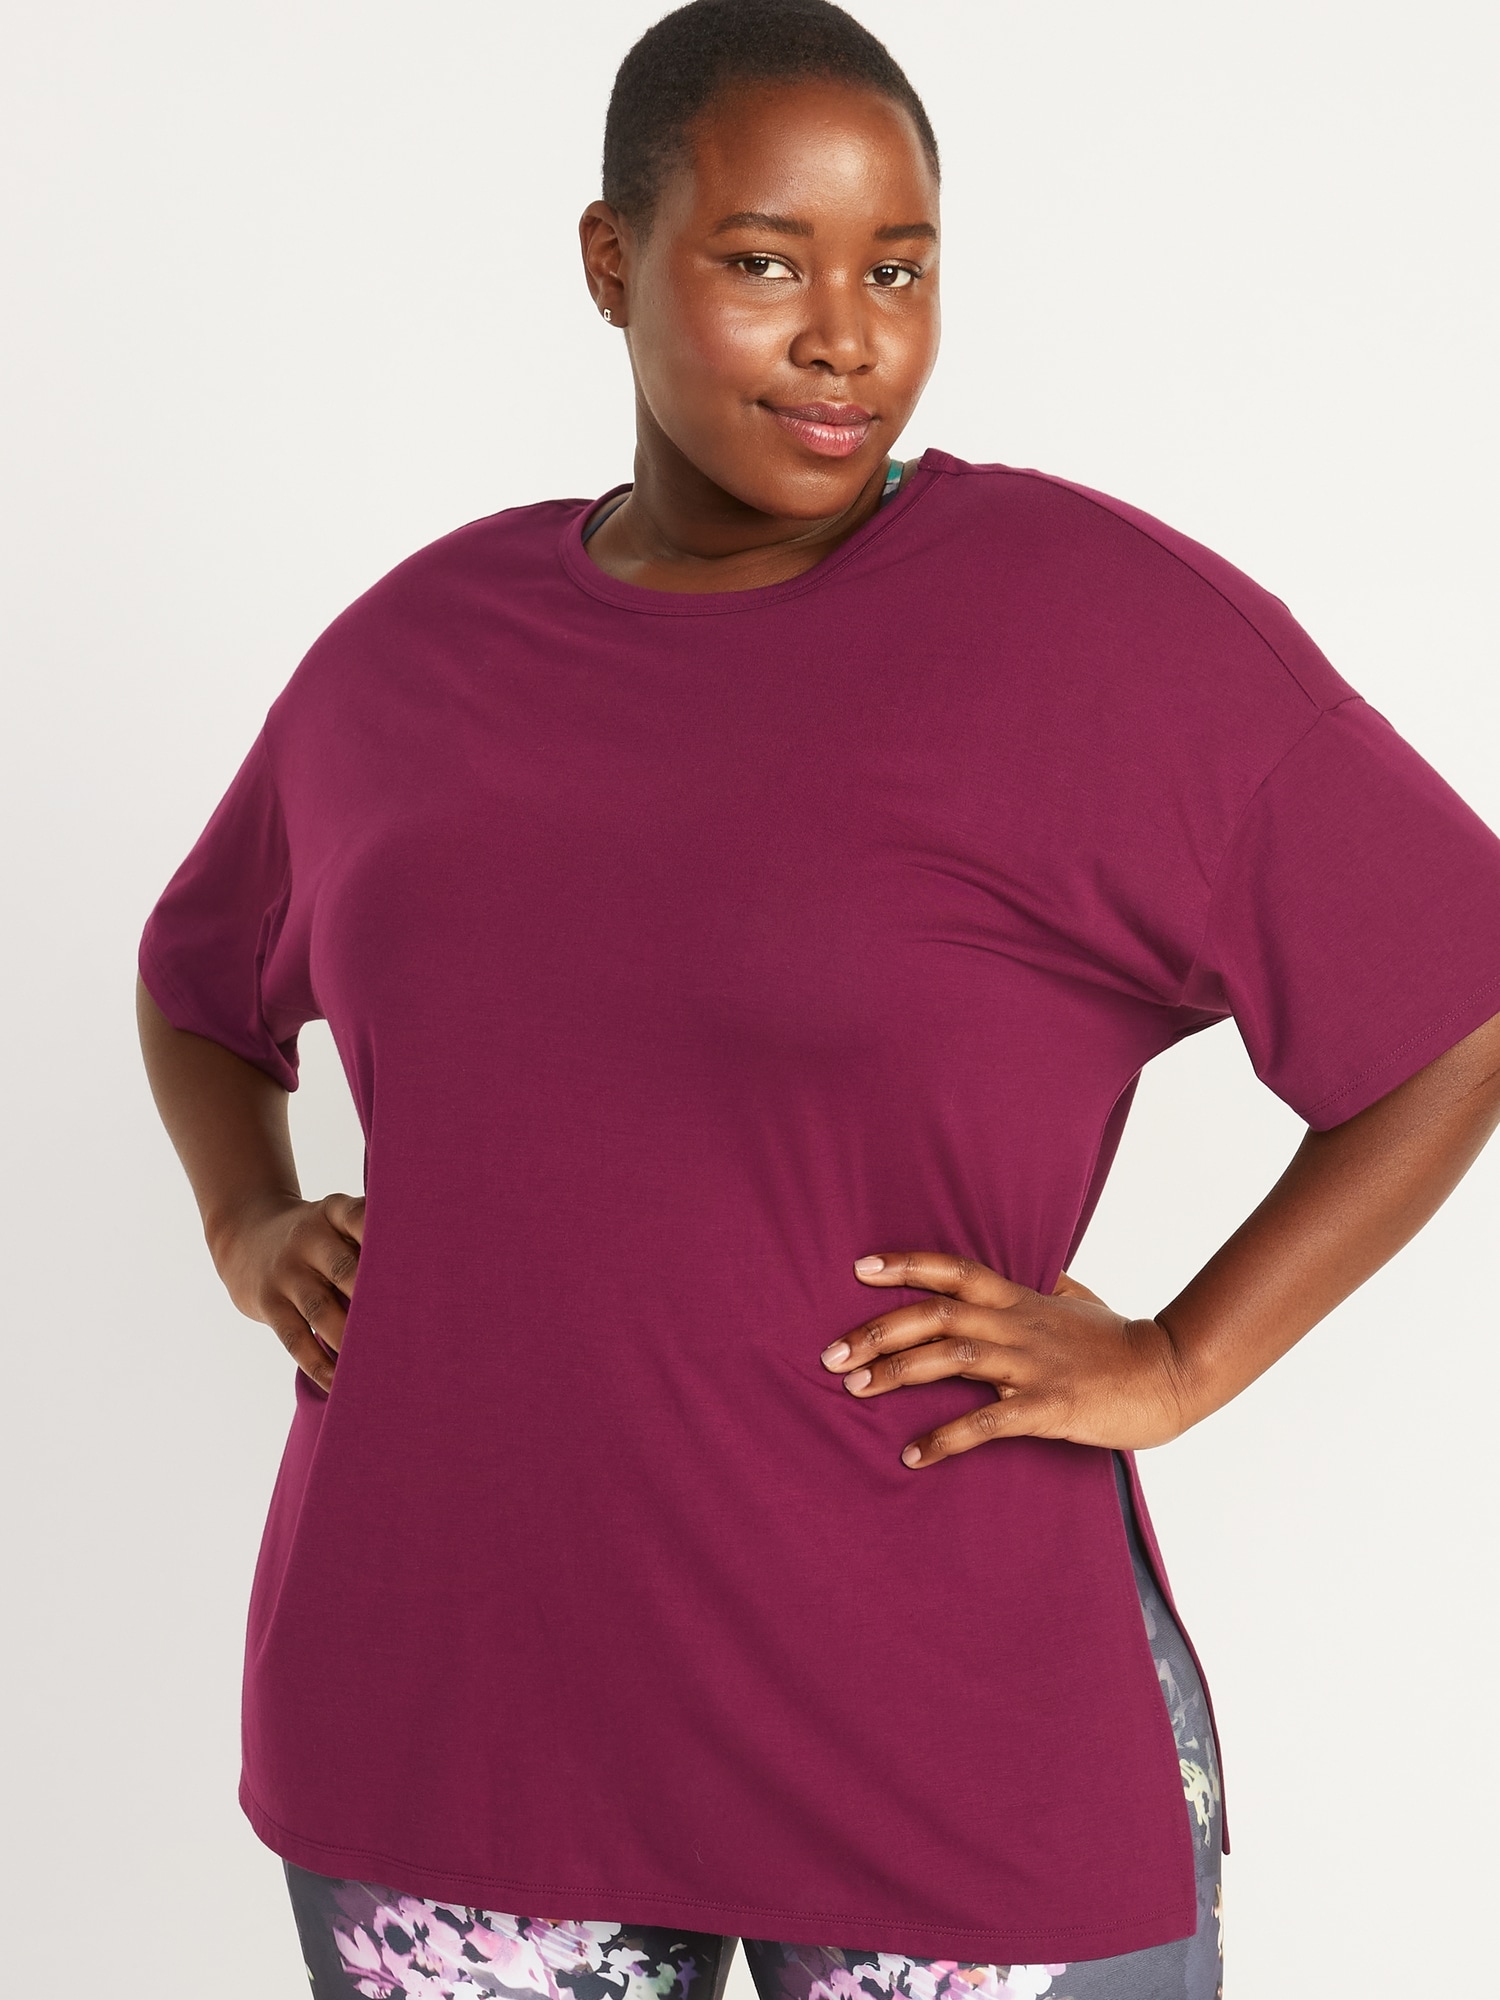 Oversized UltraLite All-Day Tunic for Women | Old Navy